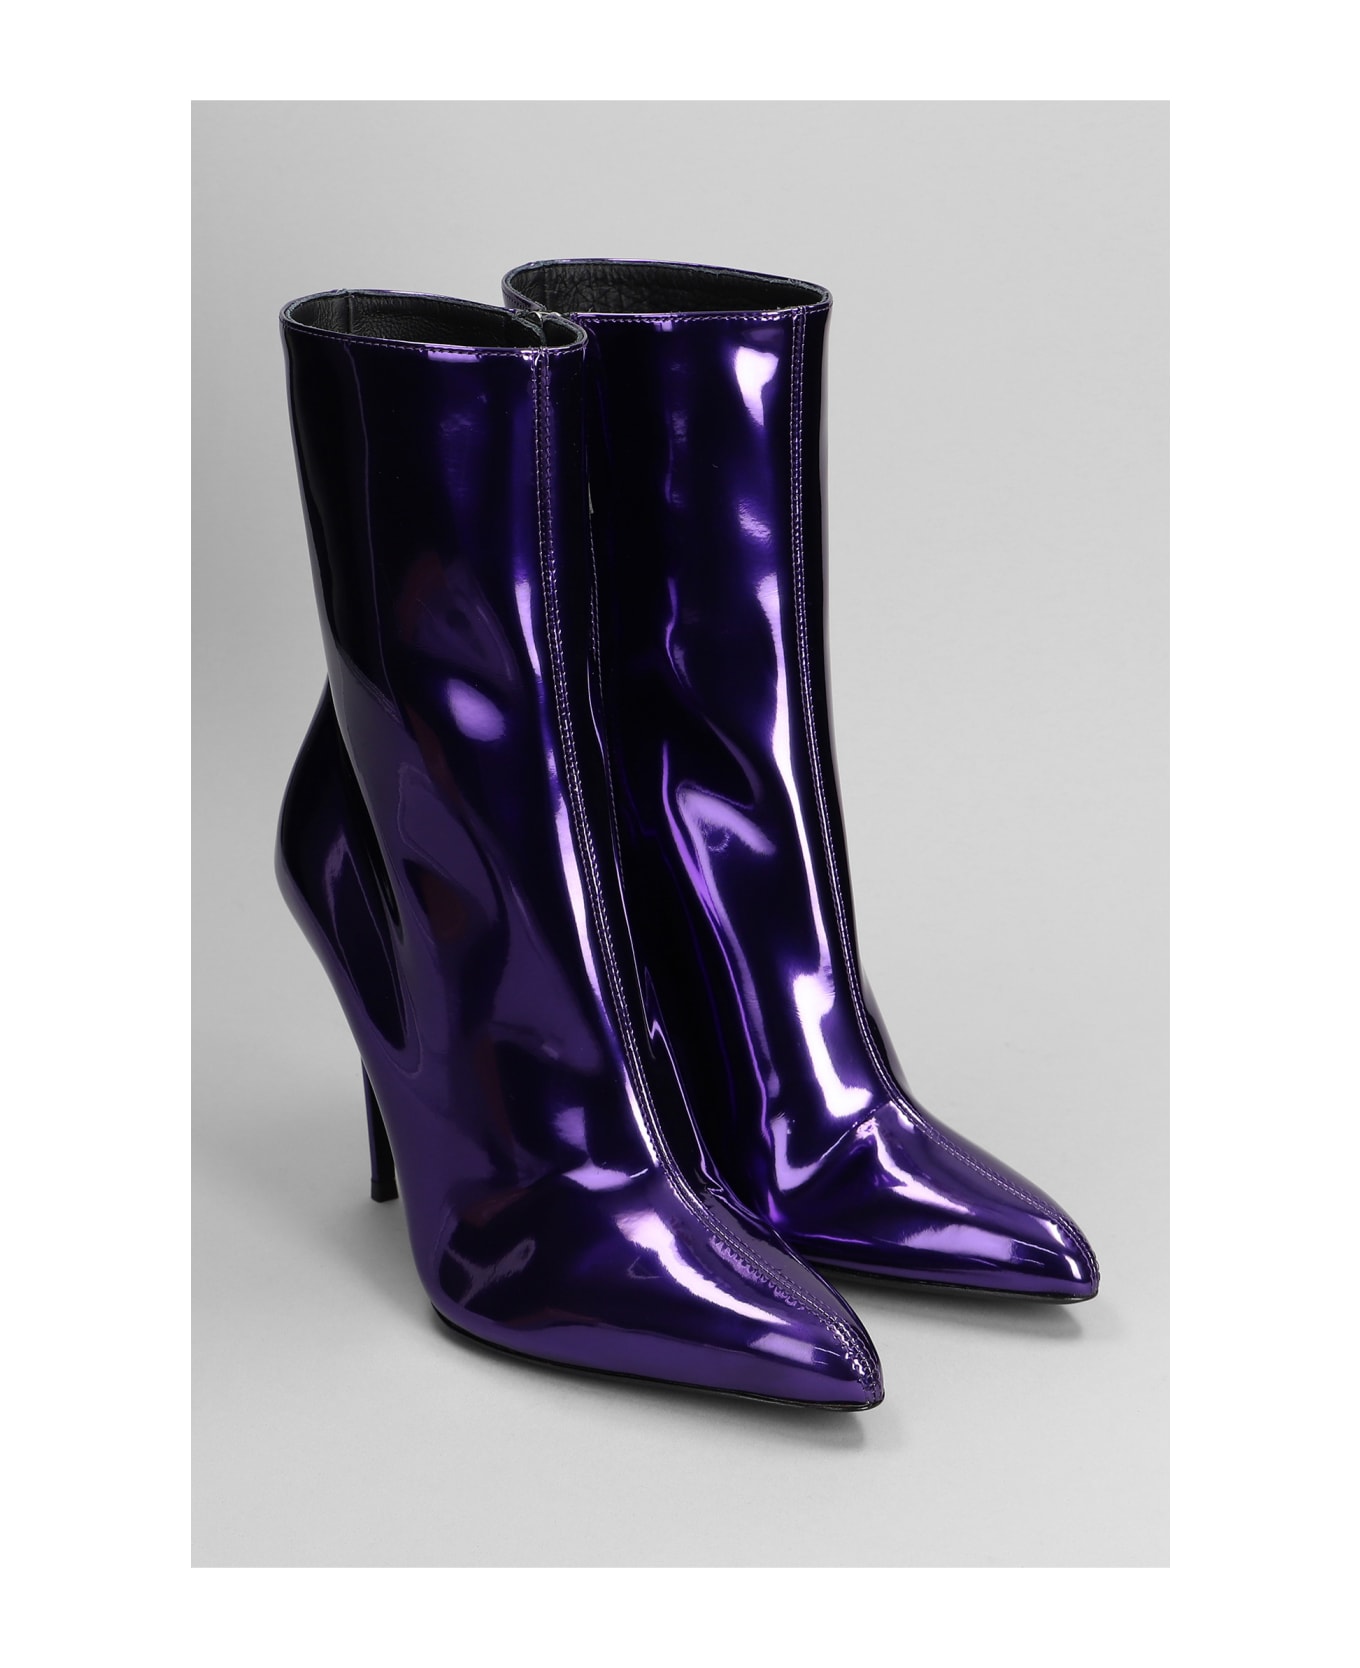 Giuseppe Zanotti Brytta High Heels Ankle Boots In Viola Patent Leather - Viola ブーツ